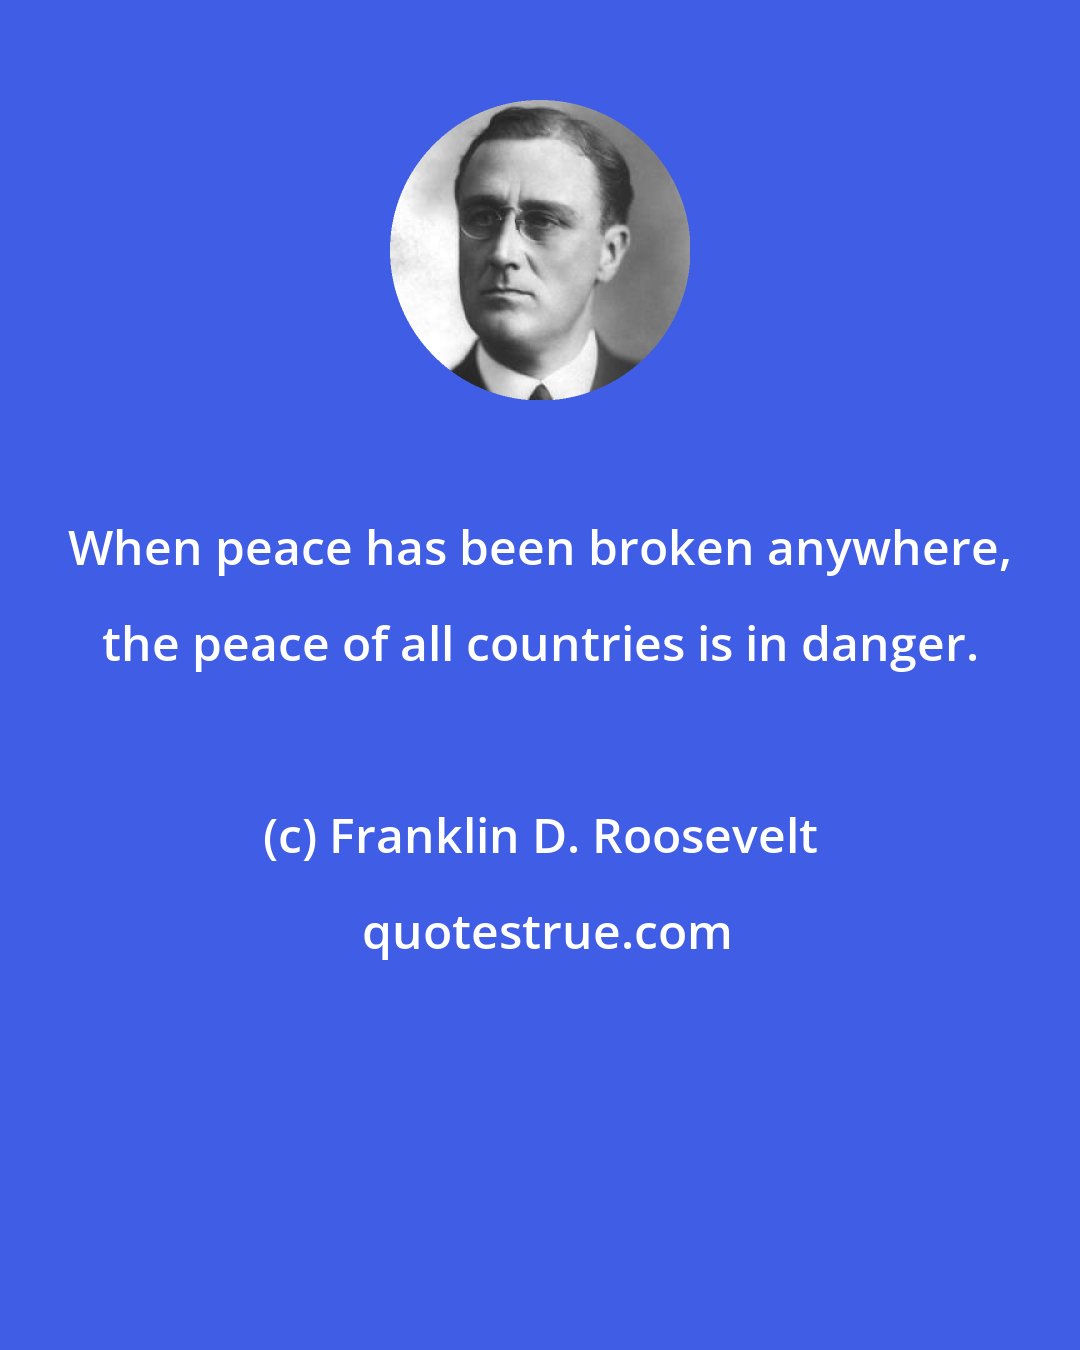 Franklin D. Roosevelt: When peace has been broken anywhere, the peace of all countries is in danger.